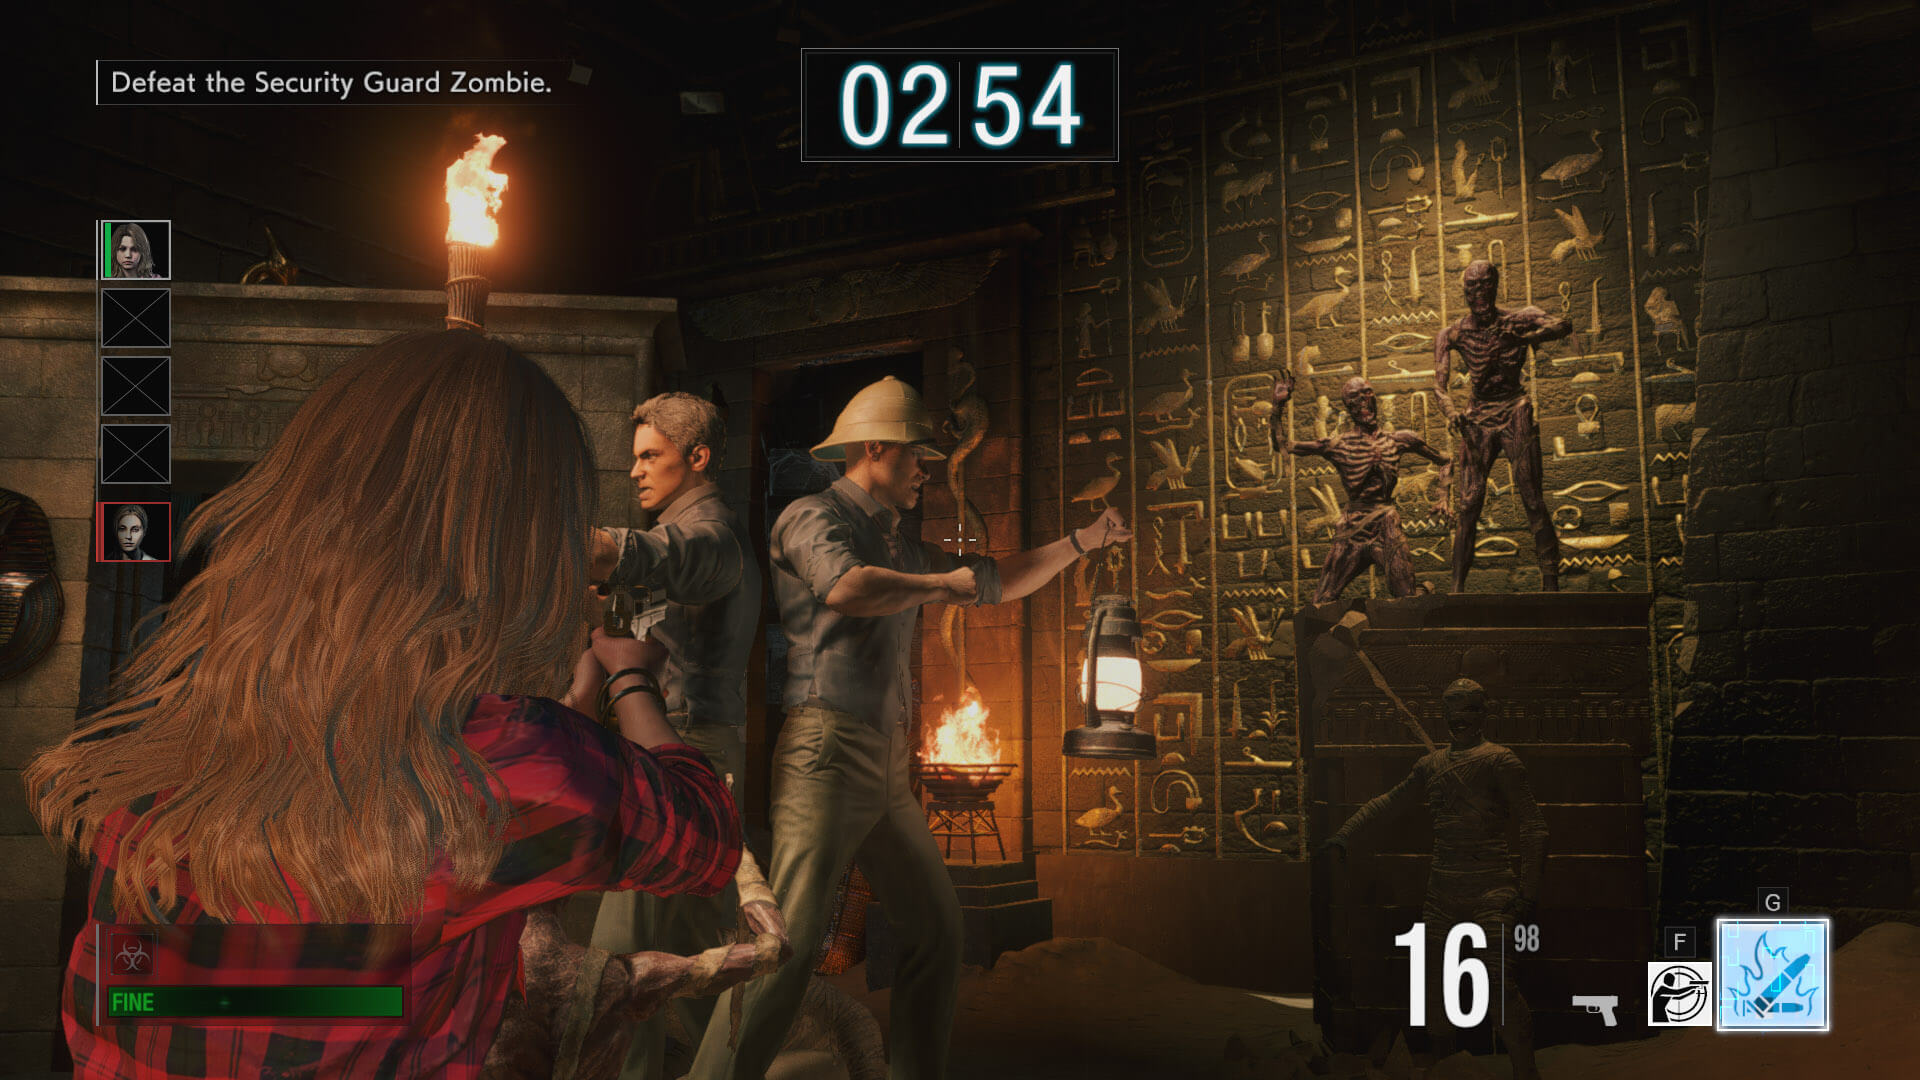 Will Resident Evil 3 have multiplayer?